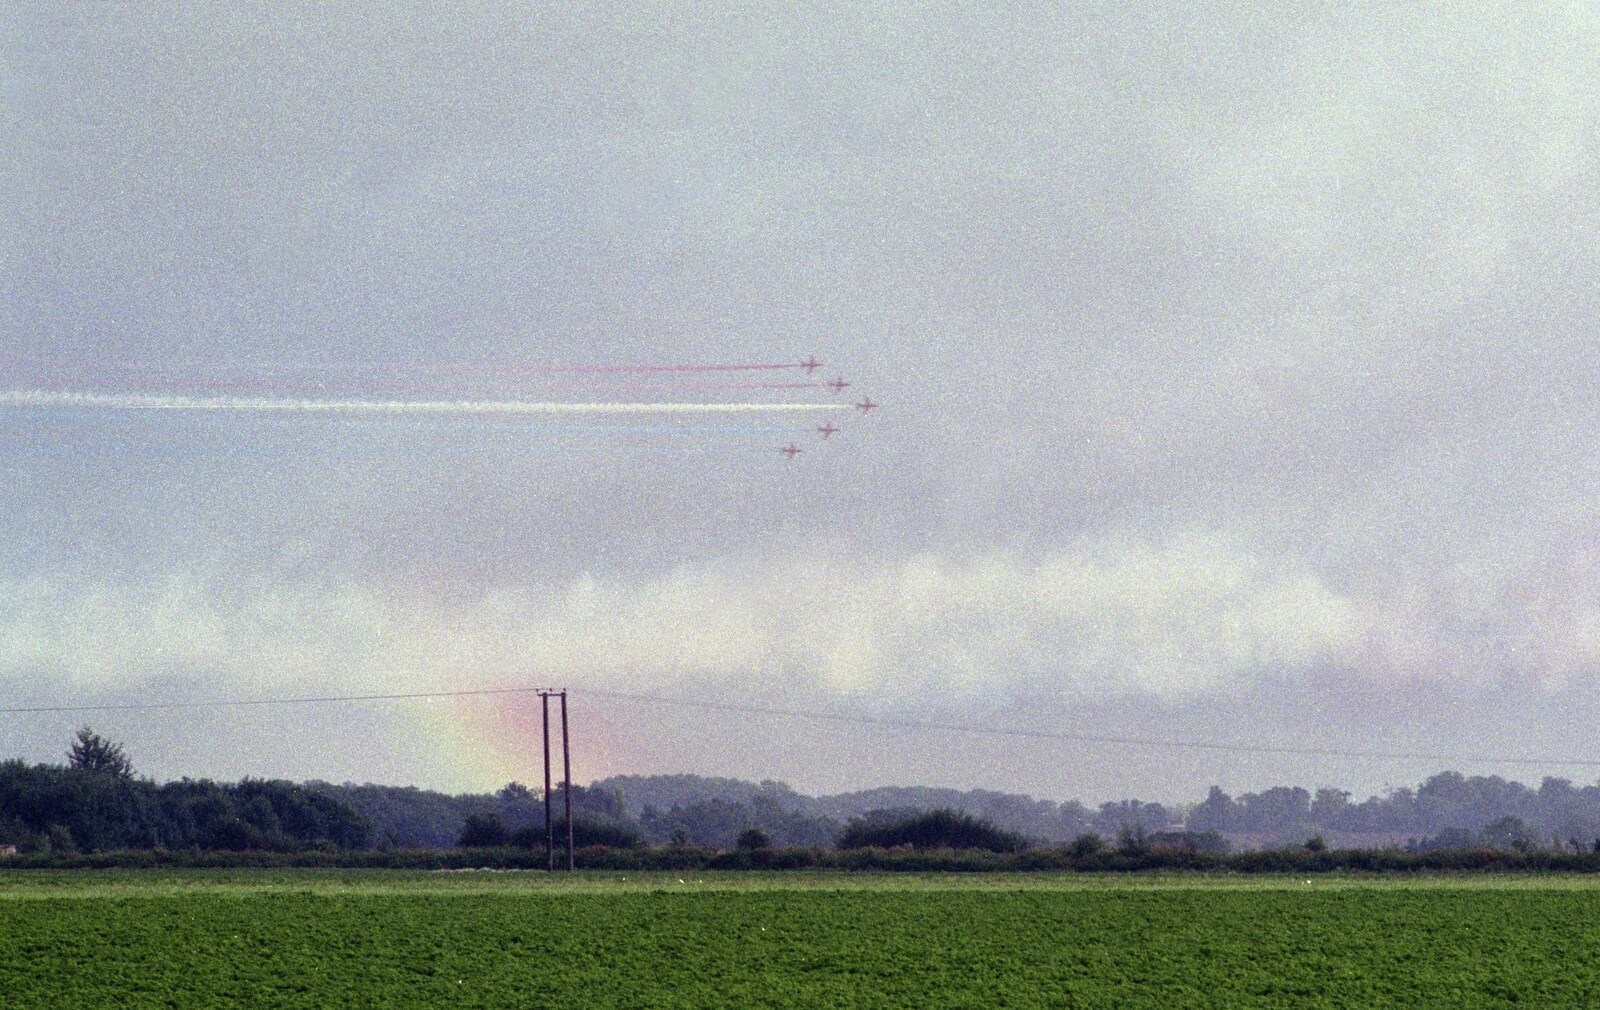 The Red Arrows, and Andrew's CISU Barbeque, Ipswich, Suffolk - 22nd July 2000: Red, white, blue, and a bit of a rainbow